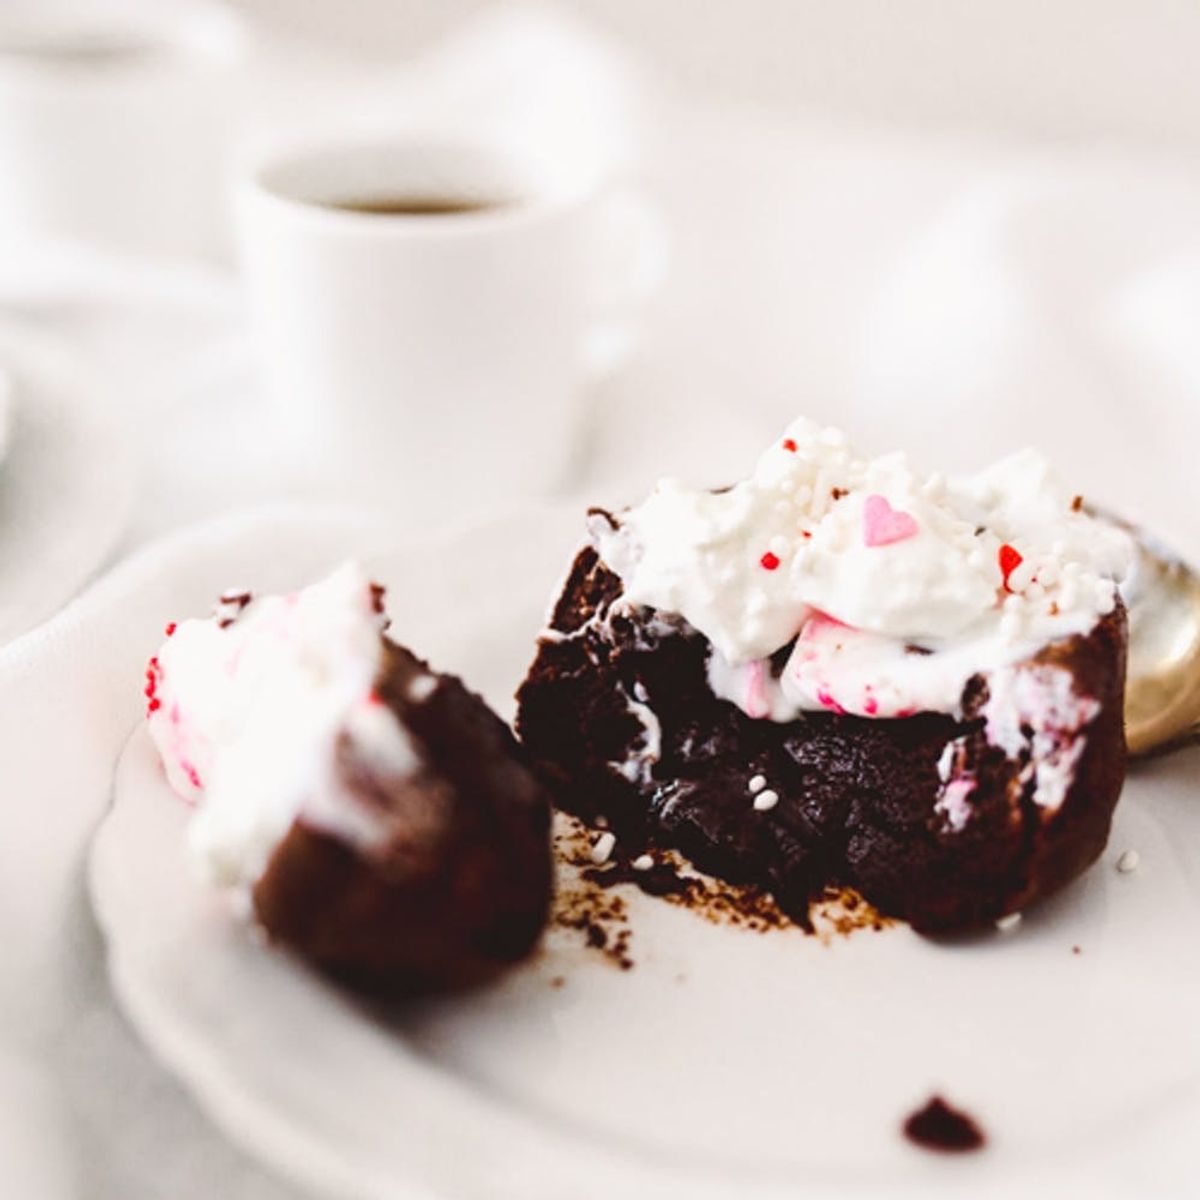 Surprise Your Valentine With This 6-Ingredient Molten Chocolate Cake